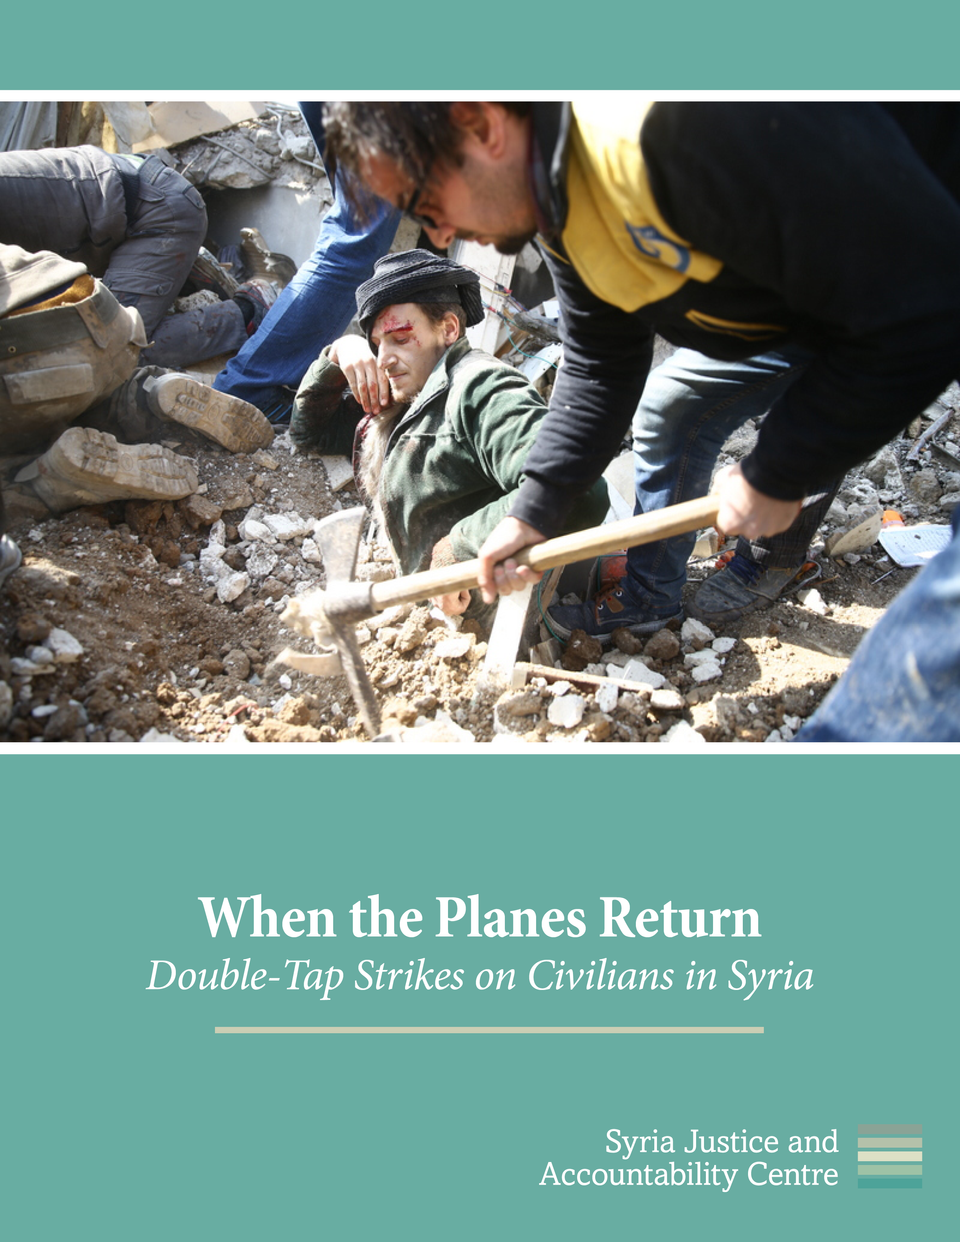 When the Planes Return - Double-Tap Strikes on Civilians in Syria